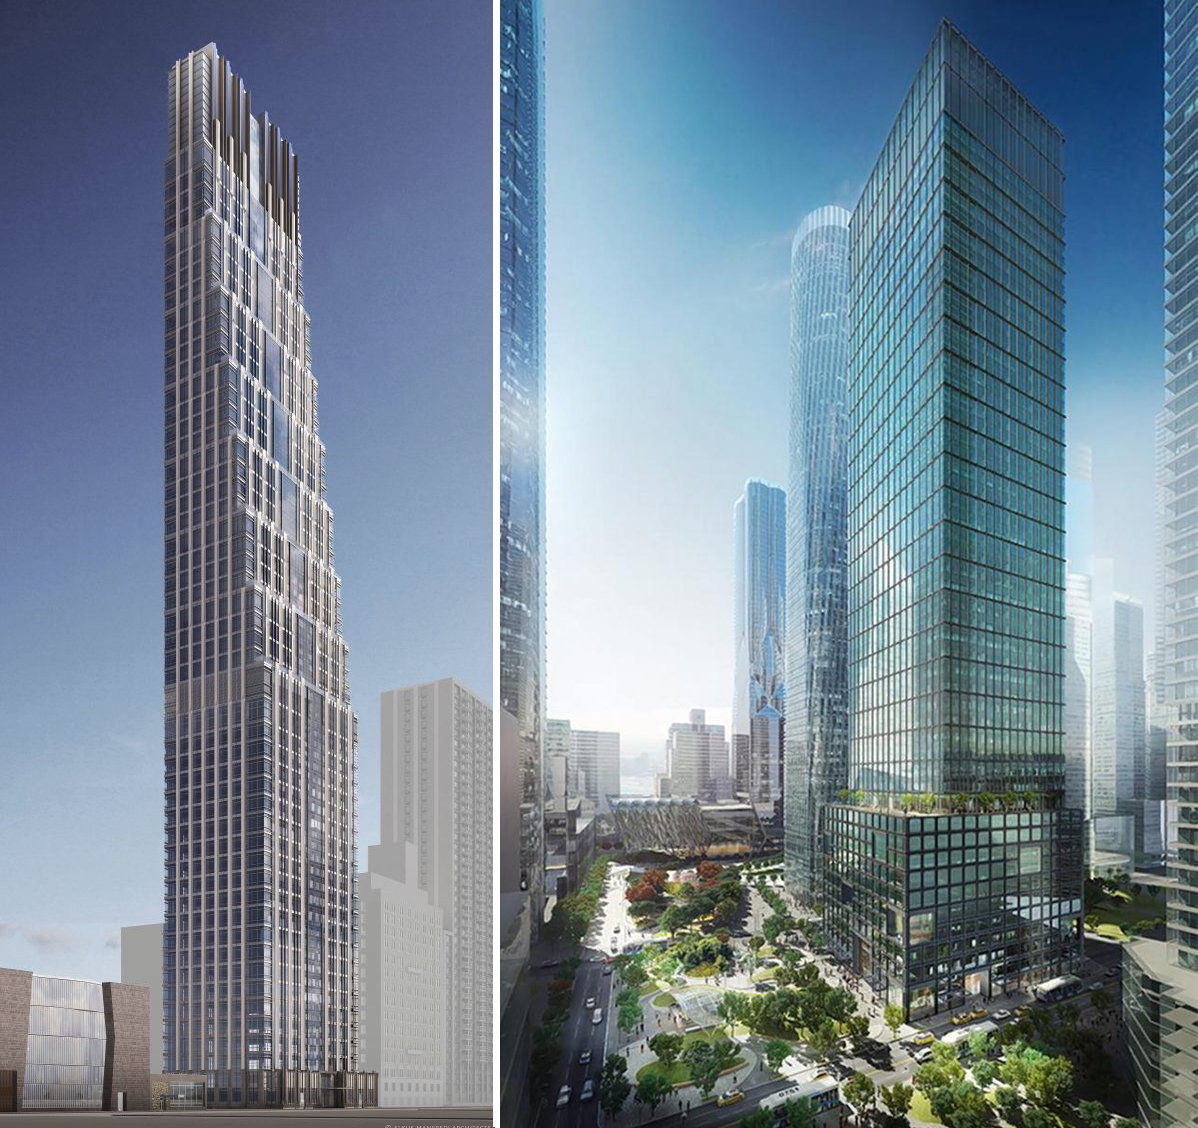 200 Amsterdam Avenue and 55 Hudson Yards